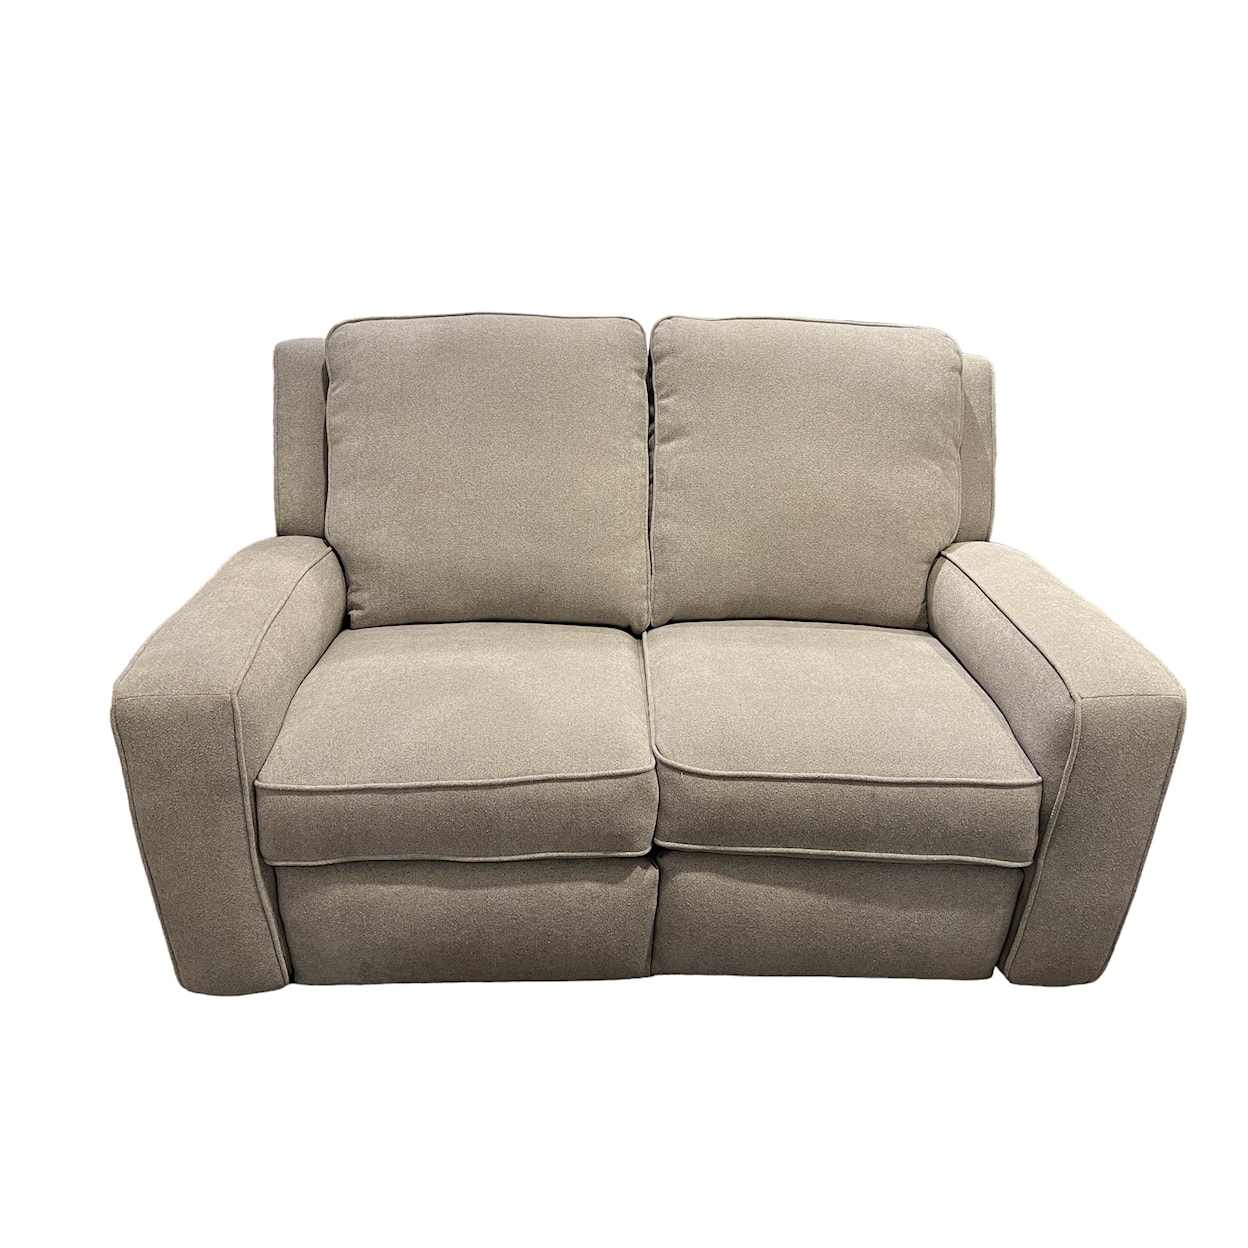 Southern Motion City Limits Power Loveseat